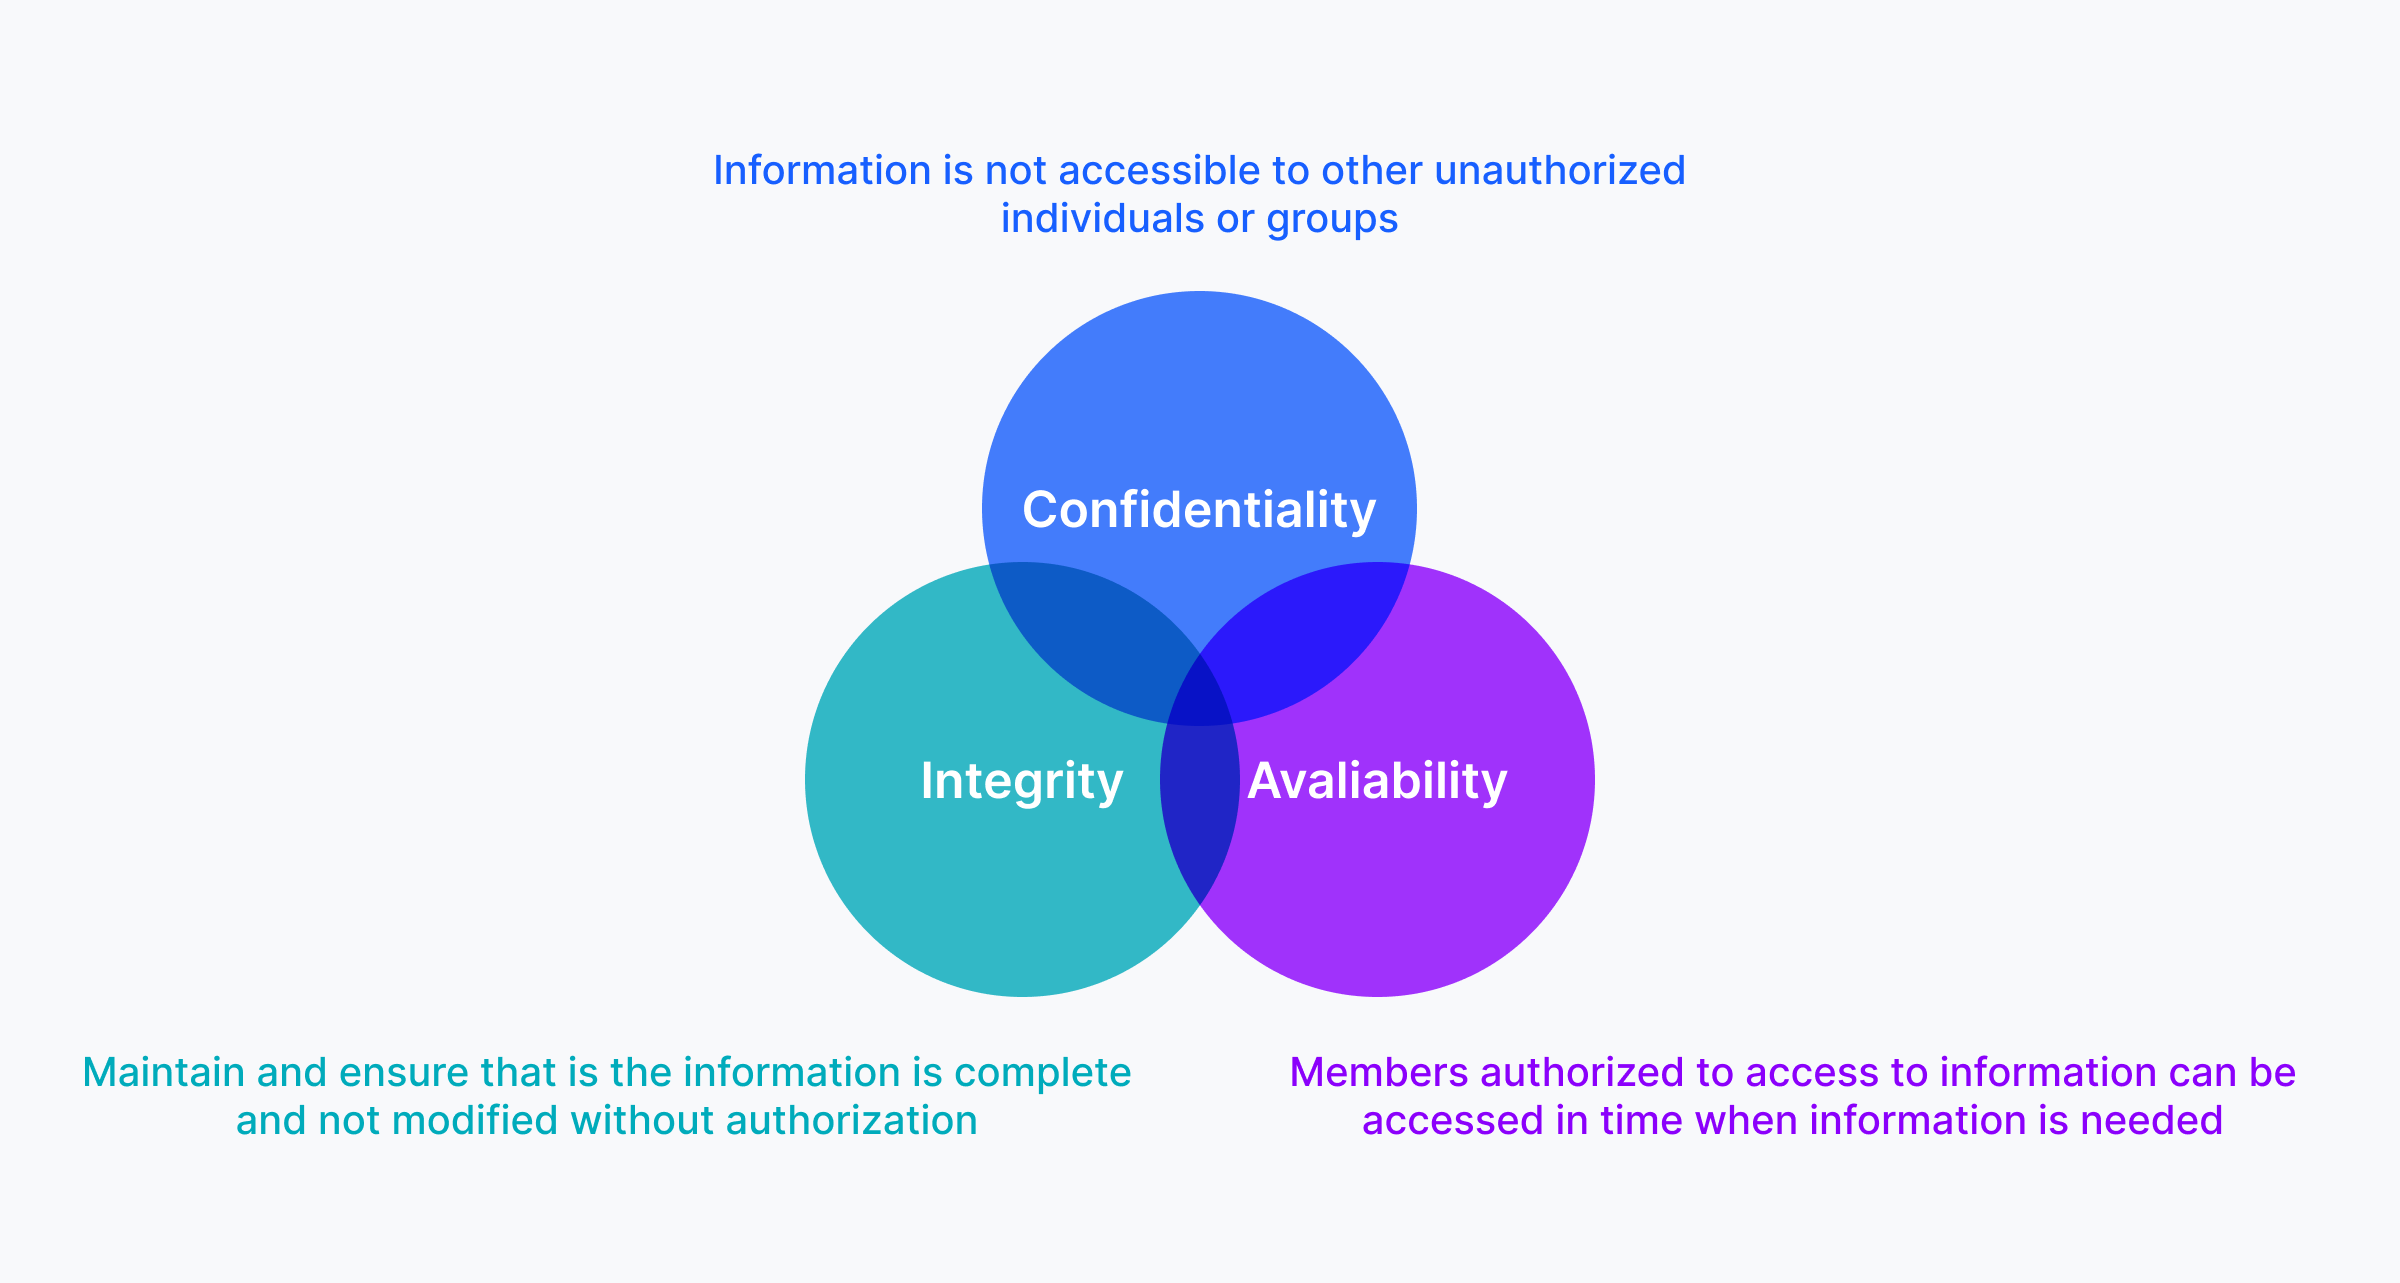 Three Pillars of Infosec: Confidentiality, Integrity and Availability